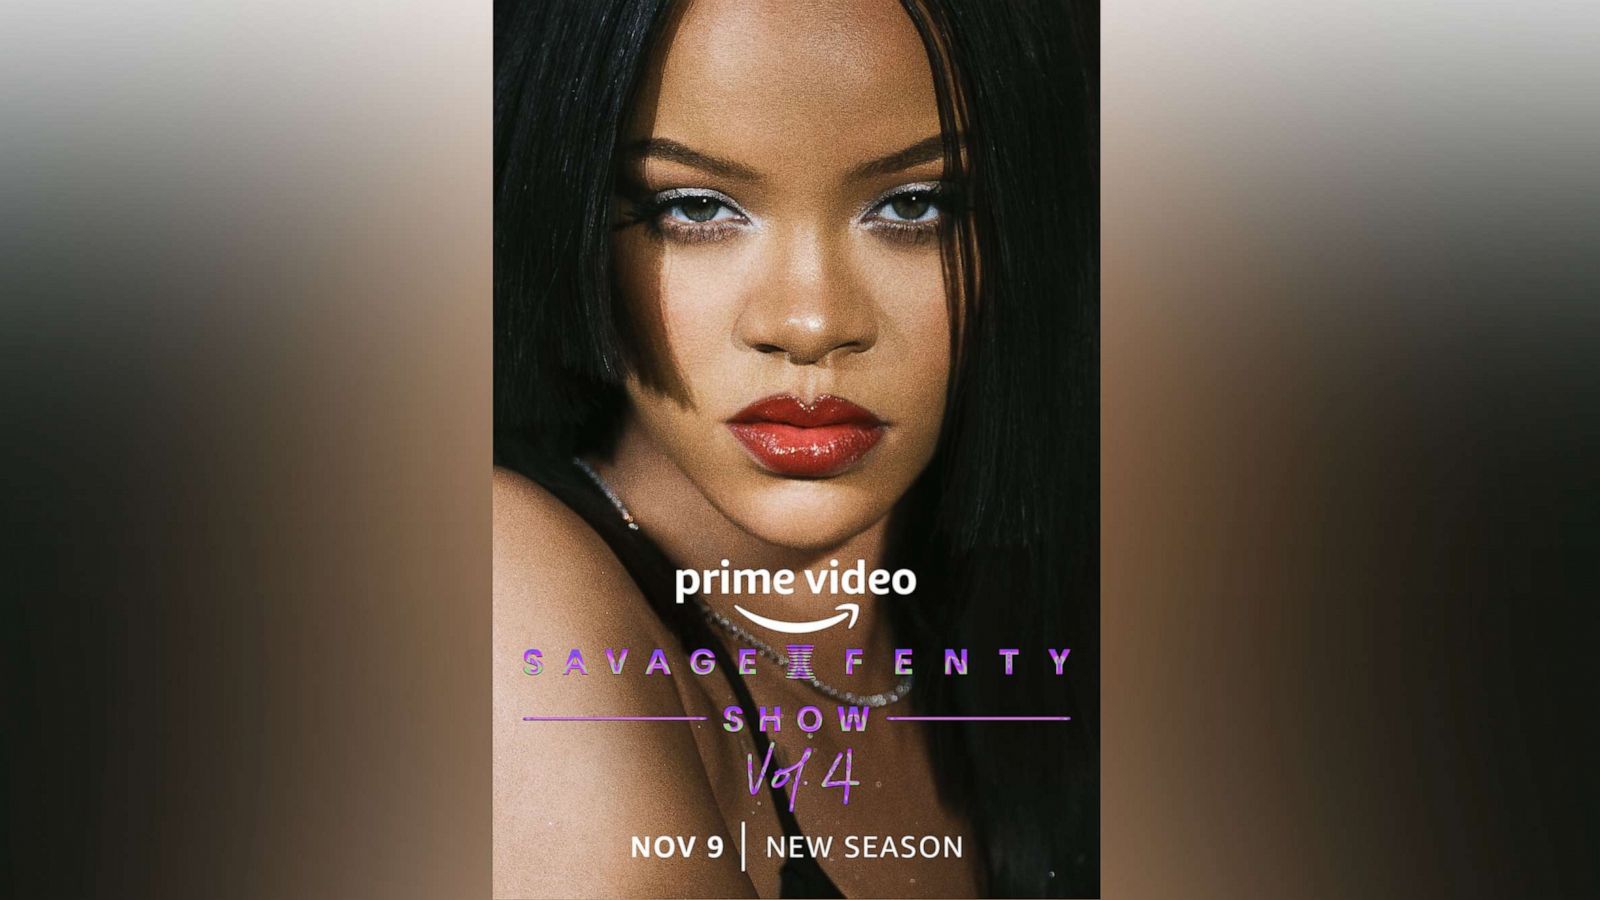 New trailer released for Rihanna's upcoming star-studded Savage x Fenty  Vol. 4 show - Good Morning America